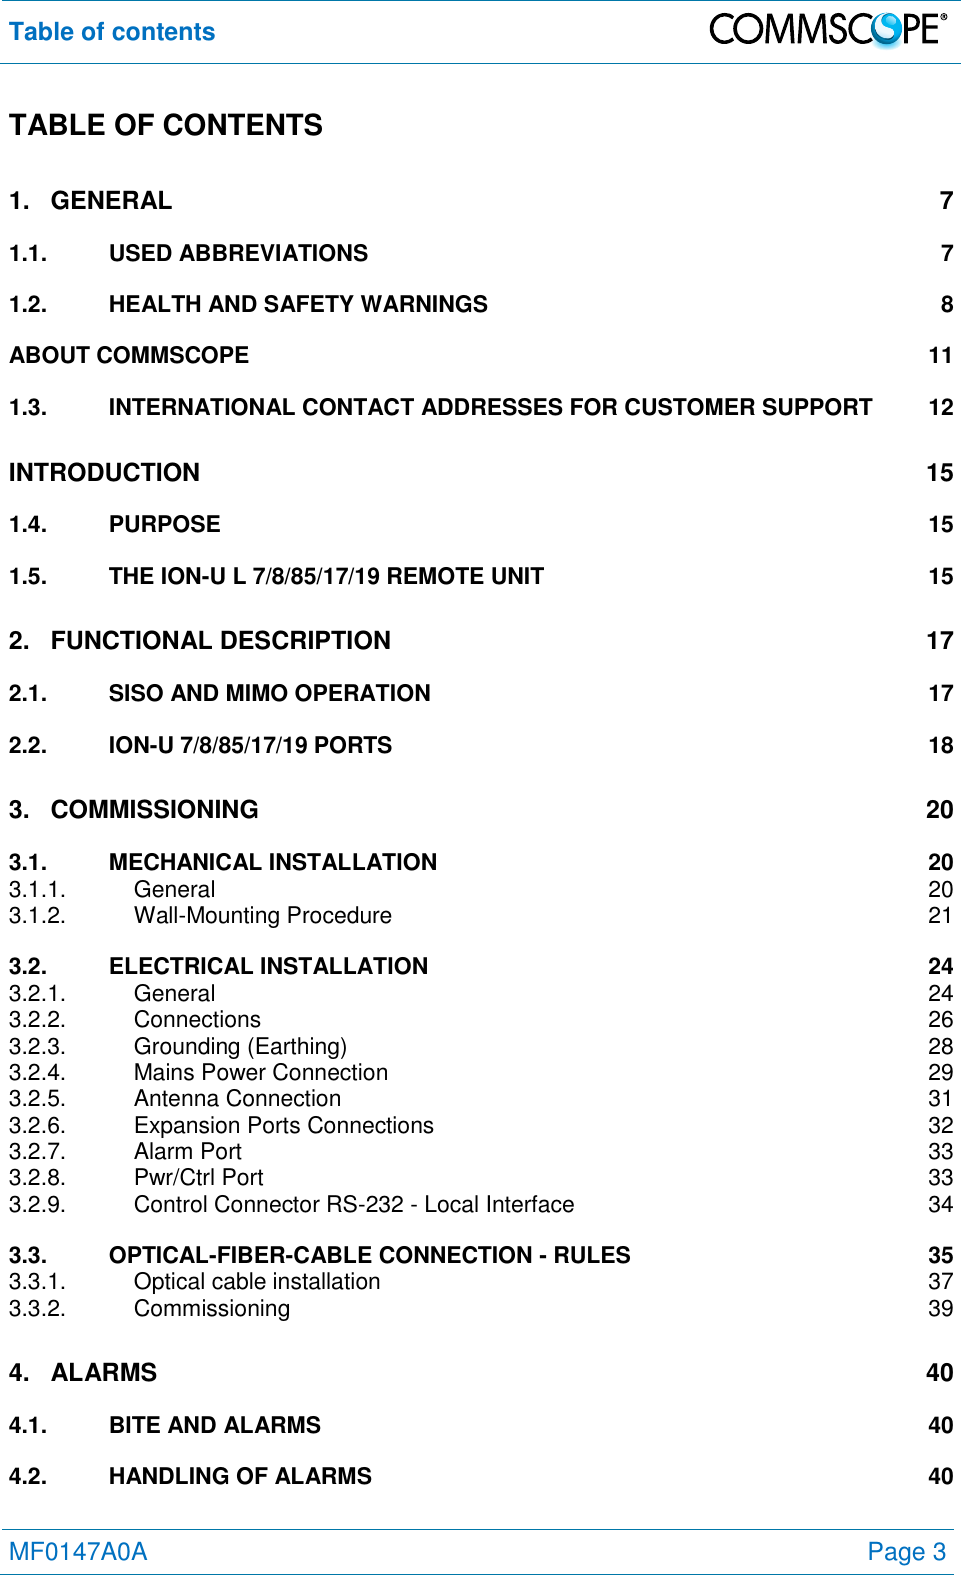 Table of contents   MF0147A0A Page 3  TABLE OF CONTENTS 1. GENERAL  7 1.1. USED ABBREVIATIONS  7 1.2. HEALTH AND SAFETY WARNINGS  8 ABOUT COMMSCOPE  11 1.3. INTERNATIONAL CONTACT ADDRESSES FOR CUSTOMER SUPPORT  12 INTRODUCTION  15 1.4. PURPOSE  15 1.5. THE ION-U L 7/8/85/17/19 REMOTE UNIT  15 2. FUNCTIONAL DESCRIPTION 17 2.1. SISO AND MIMO OPERATION 17 2.2. ION-U 7/8/85/17/19 PORTS  18 3. COMMISSIONING  20 3.1. MECHANICAL INSTALLATION 20 3.1.1. General  20 3.1.2. Wall-Mounting Procedure  21 3.2. ELECTRICAL INSTALLATION 24 3.2.1. General  24 3.2.2. Connections  26 3.2.3. Grounding (Earthing)  28 3.2.4. Mains Power Connection  29 3.2.5. Antenna Connection  31 3.2.6. Expansion Ports Connections  32 3.2.7. Alarm Port  33 3.2.8. Pwr/Ctrl Port  33 3.2.9. Control Connector RS-232 - Local Interface  34 3.3. OPTICAL-FIBER-CABLE CONNECTION - RULES  35 3.3.1. Optical cable installation  37 3.3.2. Commissioning  39 4. ALARMS  40 4.1. BITE AND ALARMS  40 4.2. HANDLING OF ALARMS  40 